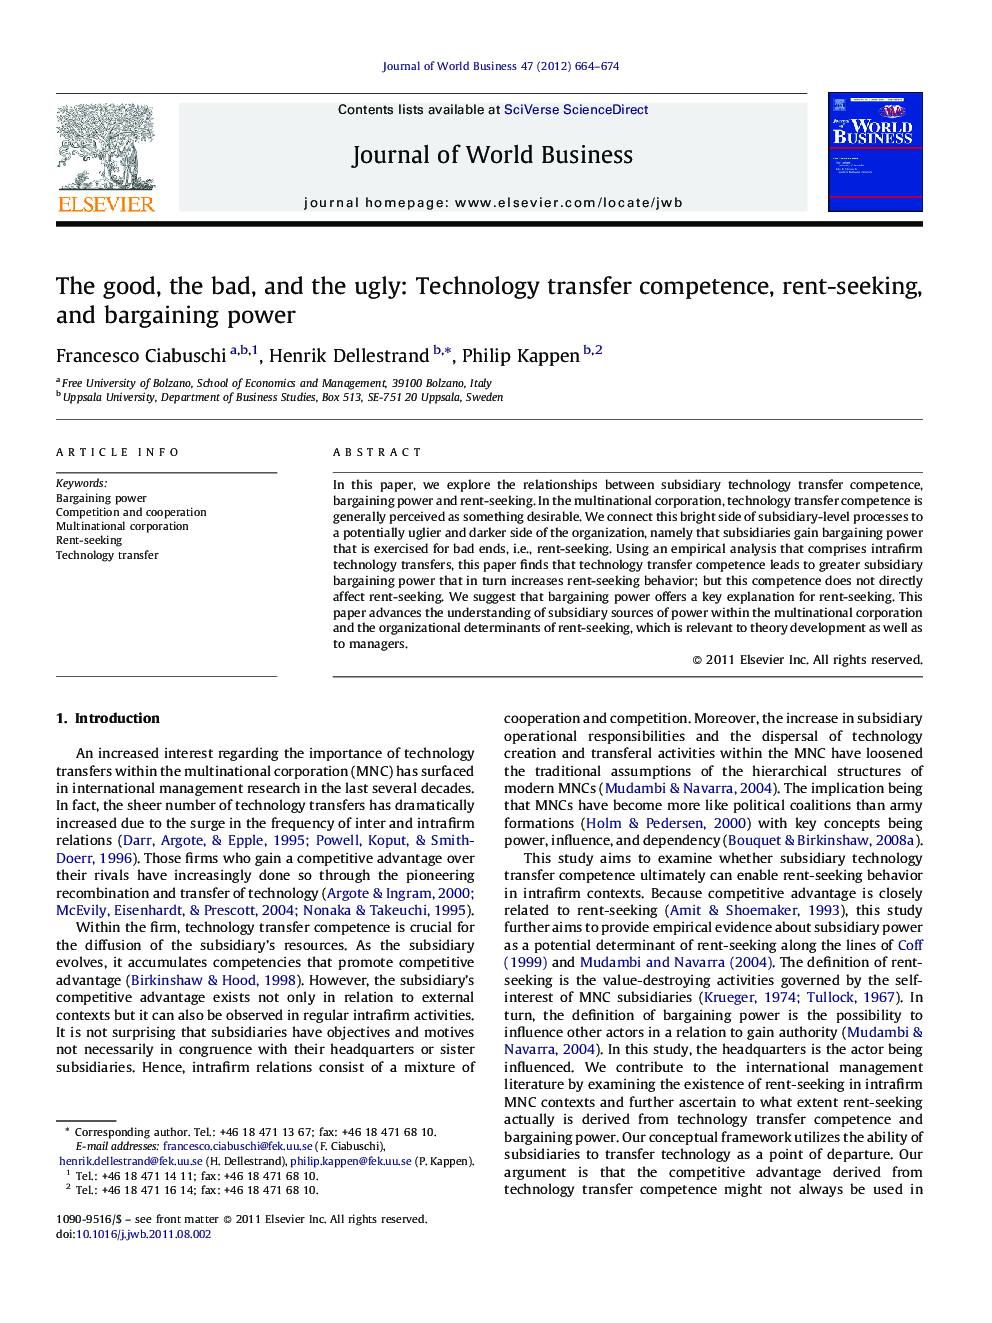 The good, the bad, and the ugly: Technology transfer competence, rent-seeking, and bargaining power